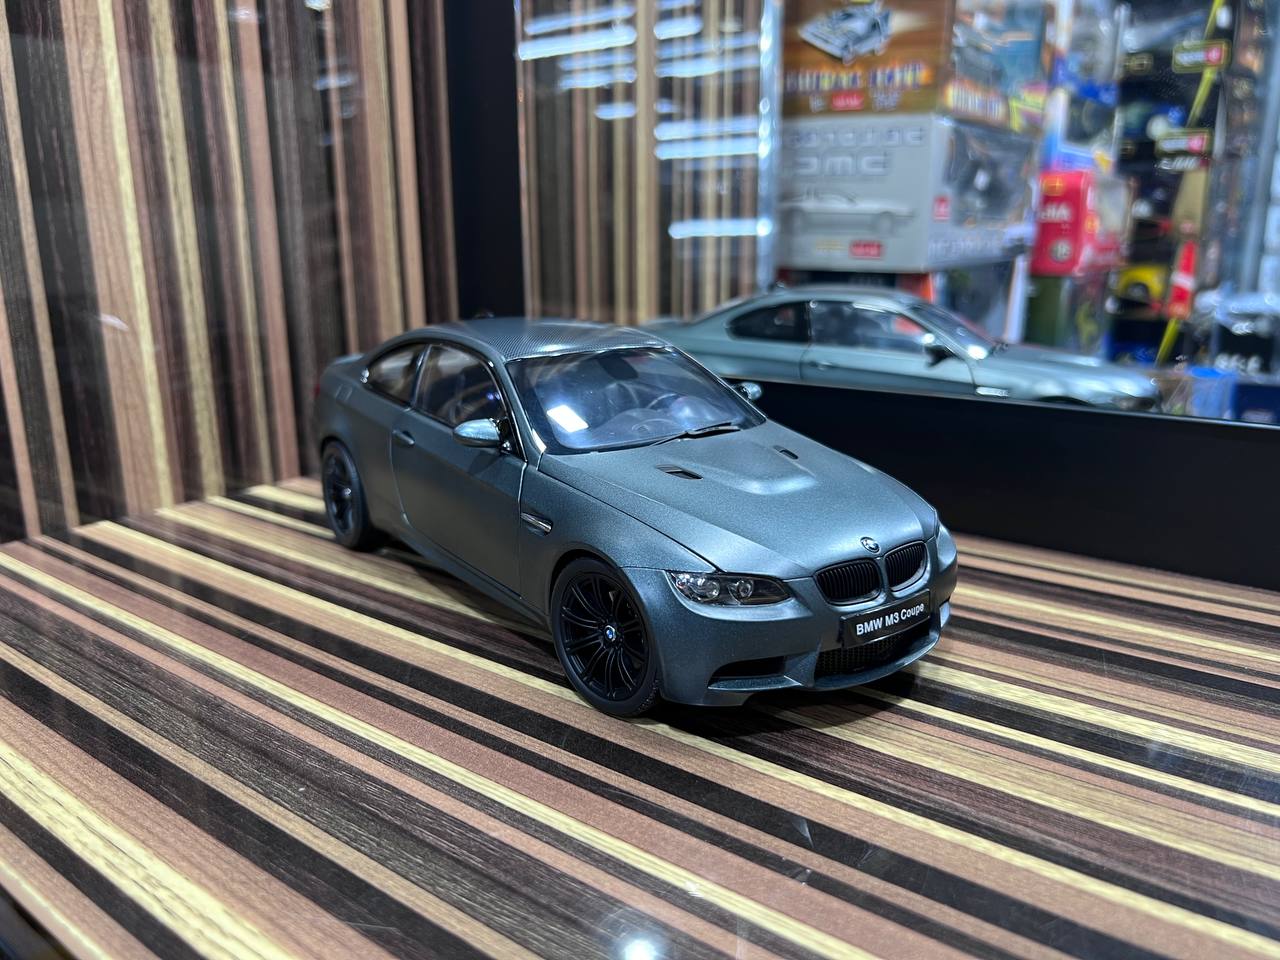 1/18 Diecast BMW M3 Coupe Kyosho Scale Model Car - Diecast model car by dturman.com - Kyosho